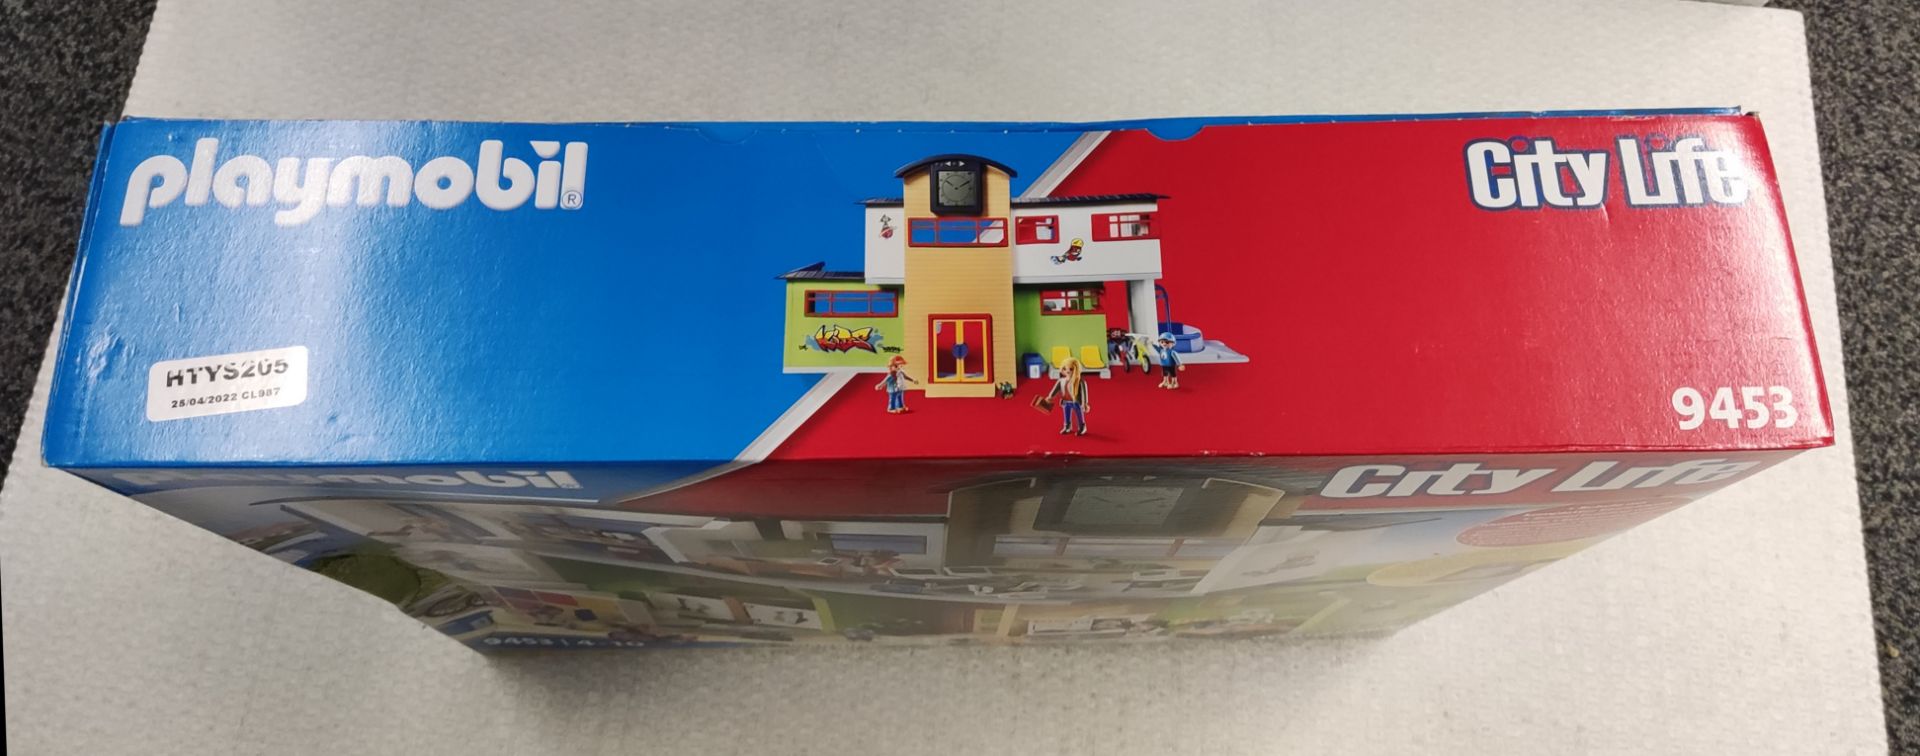 1 x Playmobil City Life School Building With Furnishings - Model 9453 - New/Boxed - Image 5 of 5